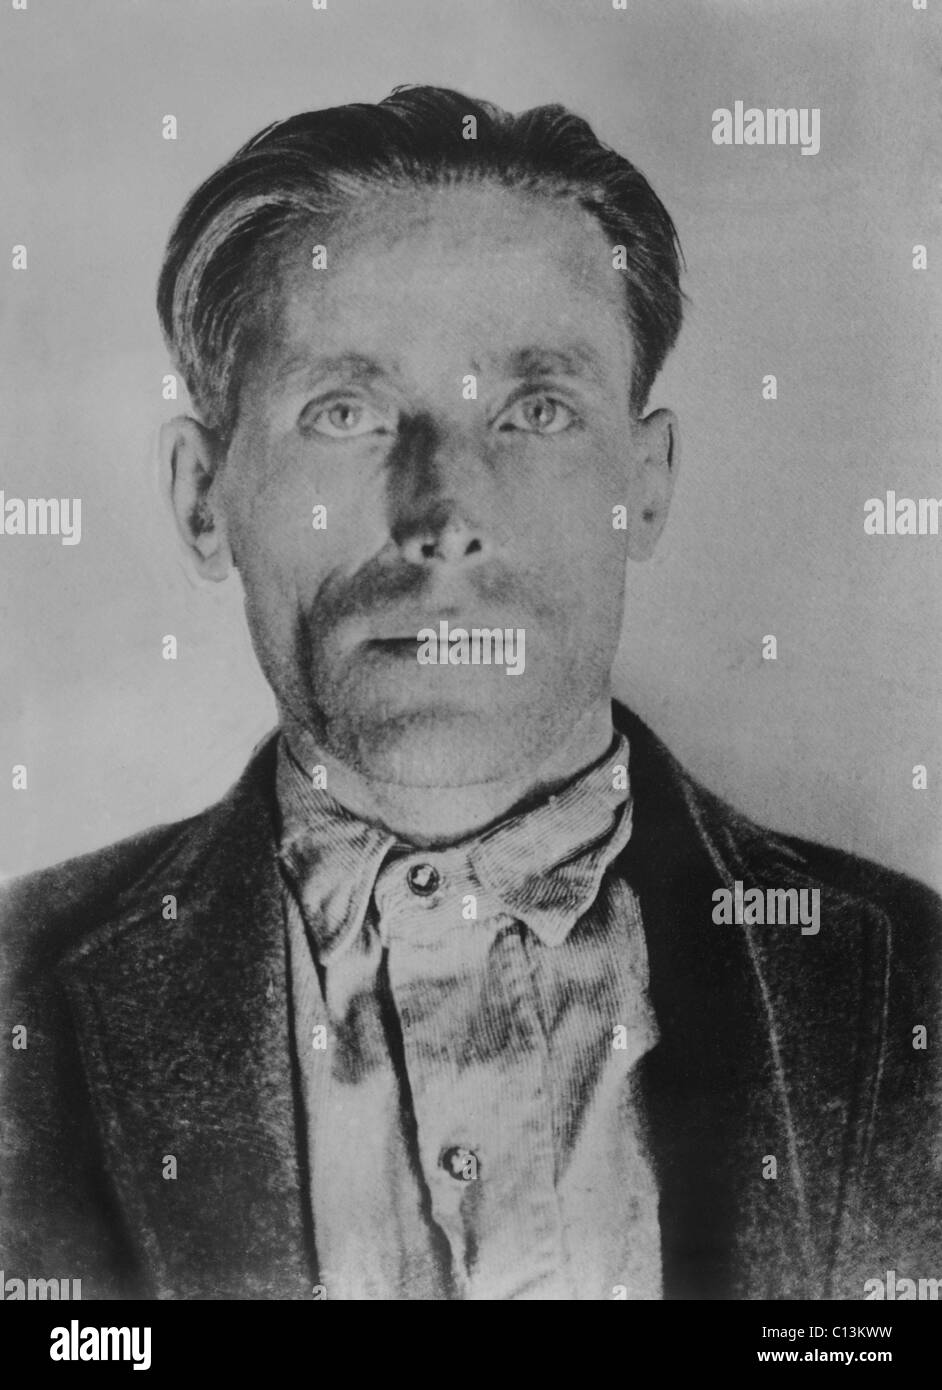 Joe Hill (1879-1915), Swedish-American labor activist, songwriter, and member of the Industrial Workers of the World (IWW) gained fame when he was executed for a Salt Lake City murder after a controversial trial. Ca. 1914. Stock Photo